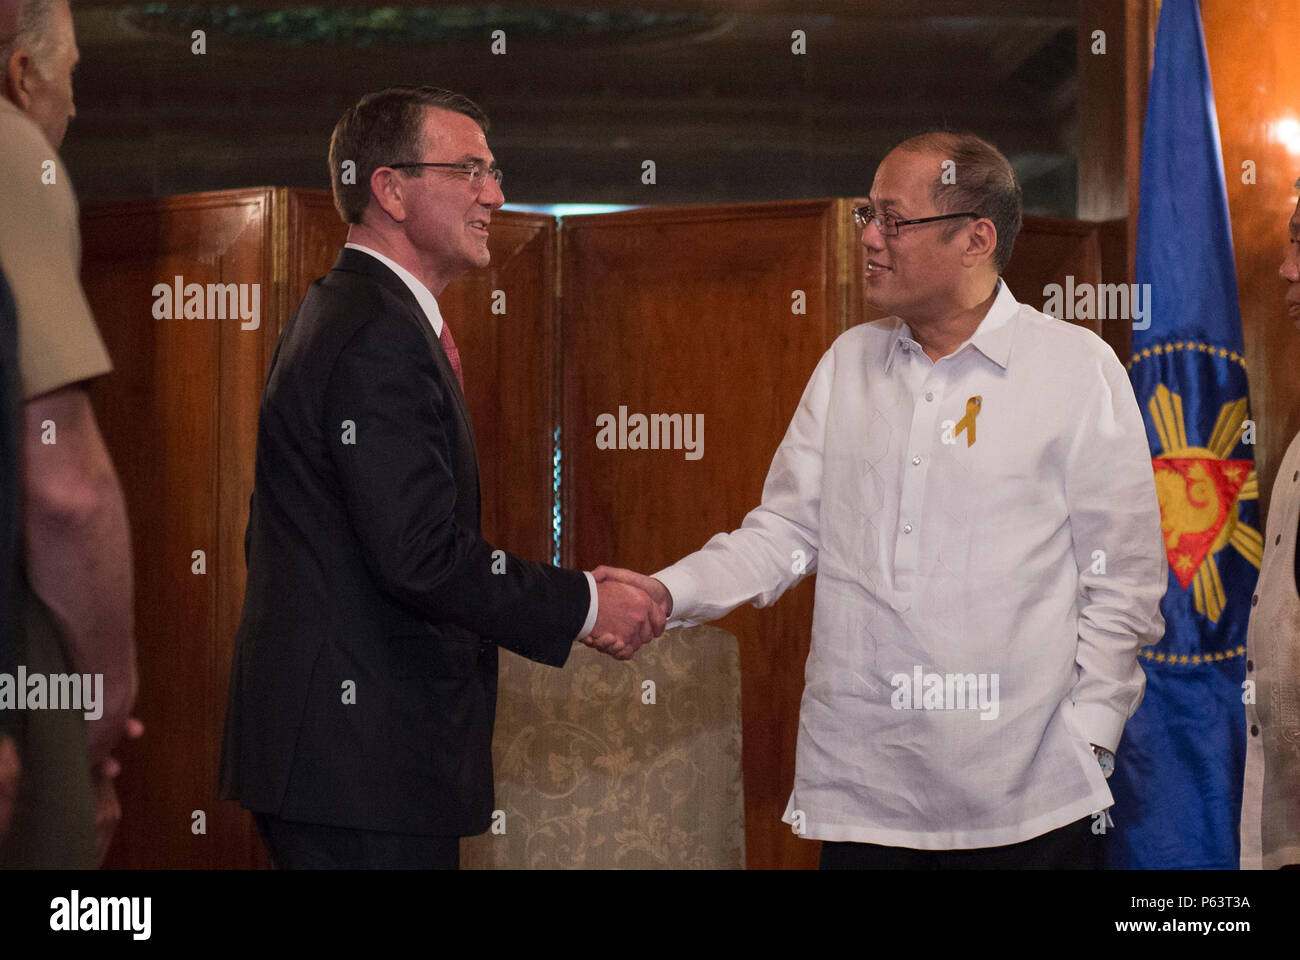 Secretary of Defense Ash Carter greets Philippine President Benigno S. Aquino III as they meet to discuss matters of mutual importance at the Malacanang Palace in Manila, Philippines April 14, 2016. Carter is visiting the Philippines to solidify the rebalance to the Asia-Pacific region.(Photo by Senior Master Sgt. Adrian Cadiz)(Released) Stock Photo